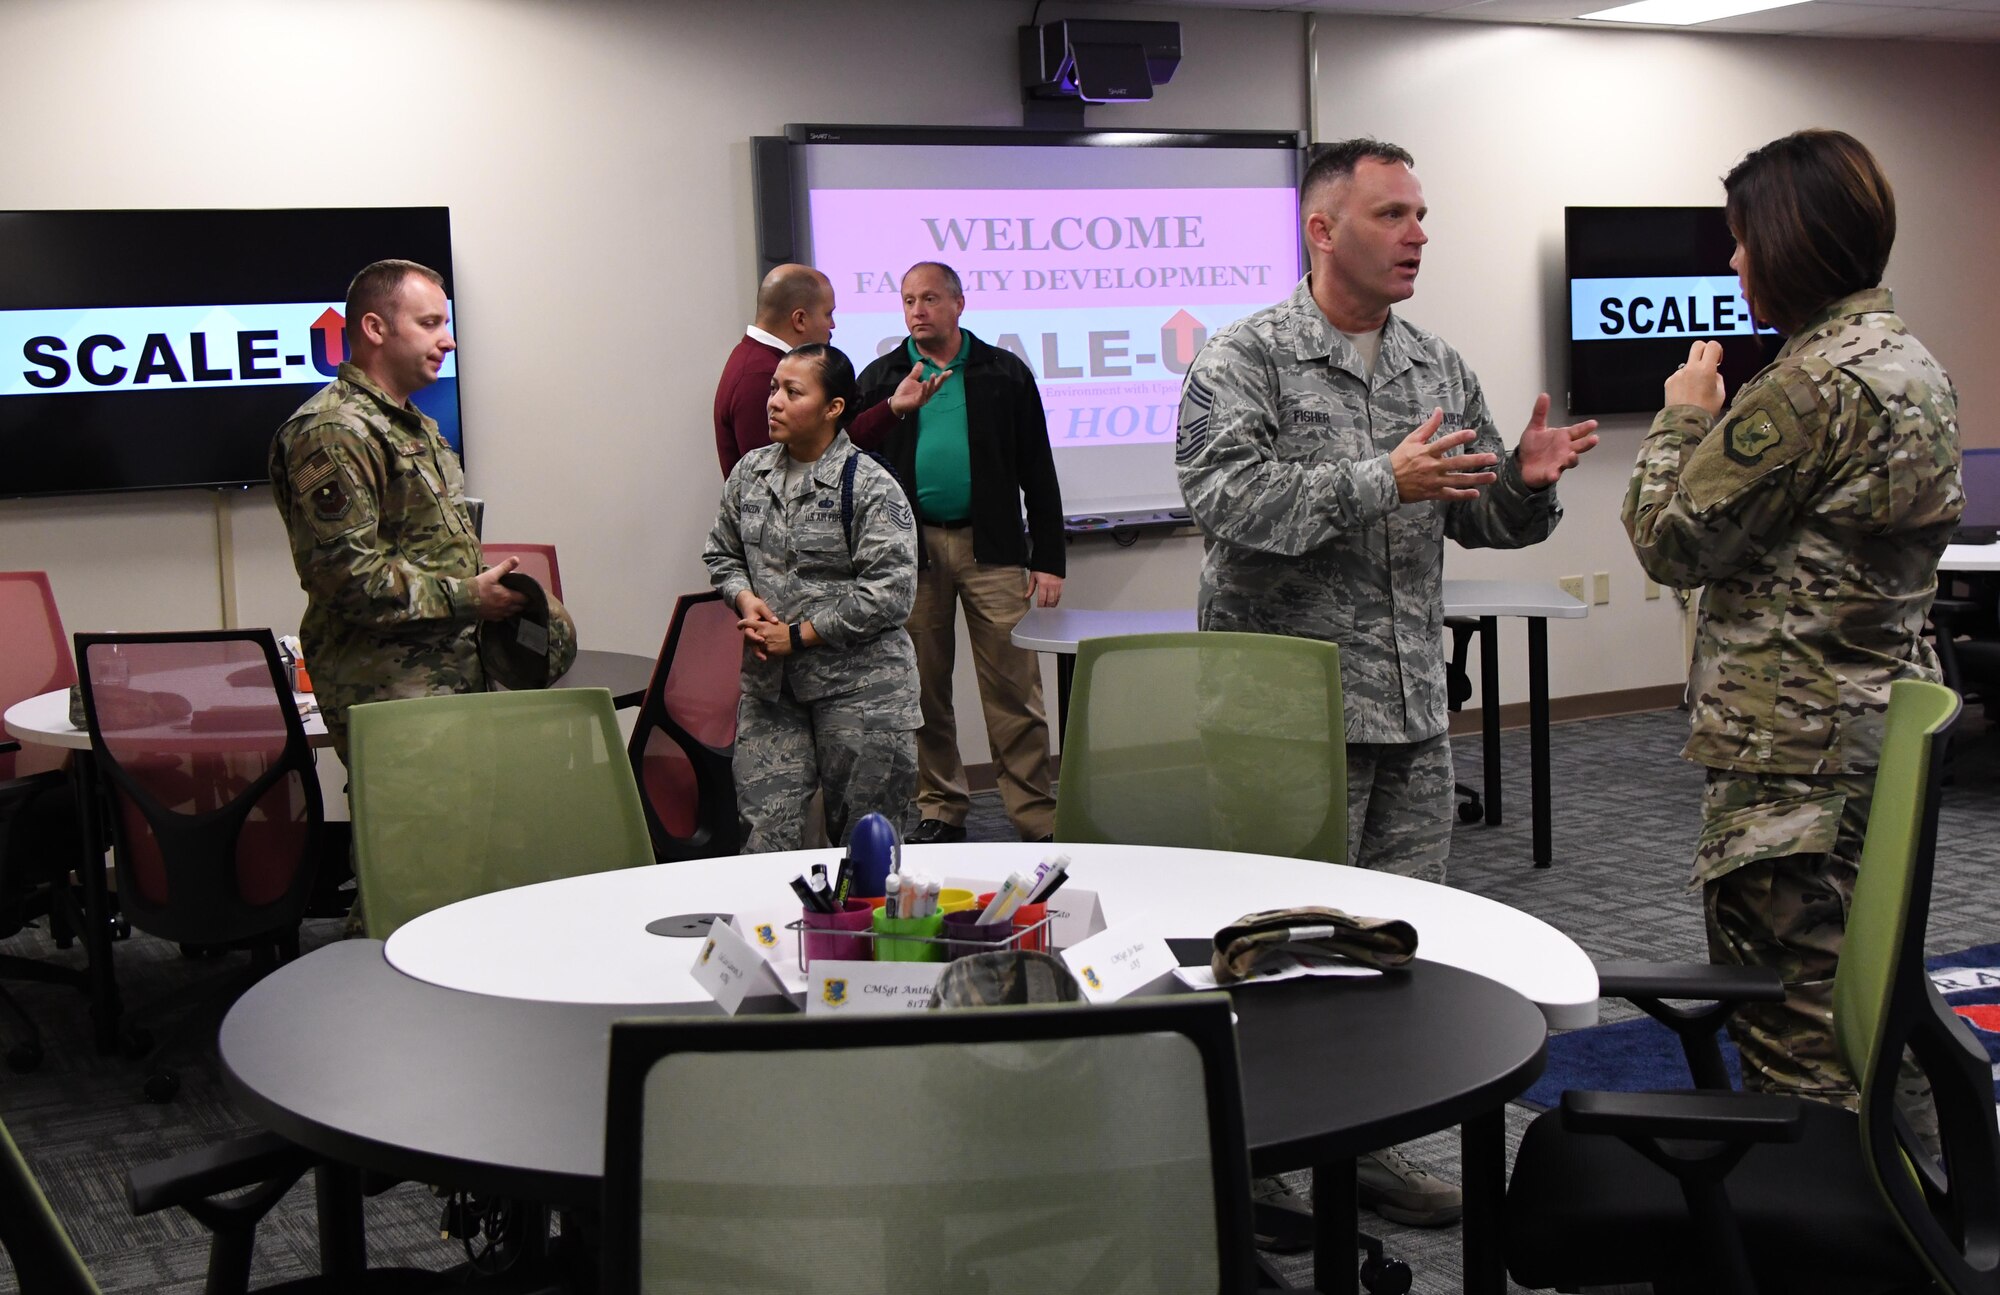 Keesler leadership and base personnel tour a classroom during the Student-Centered Active Learning Environment with Upside-down Pedagogies ribbon cutting ceremony inside Allee Hall at Keesler Air Force Base, Mississippi, Jan. 10, 2019. The SCALE-UP program was introduced by the 81st Training Support Squadron as a way to bring new technology and teaching techniques into Keesler classrooms to put more focus on students and their success in Air Force education. The new program has also brought a new way to teach basic skills like time management and critical thinking to the students while learning their career field. (U.S. Air Force photo by Kemberly Groue)